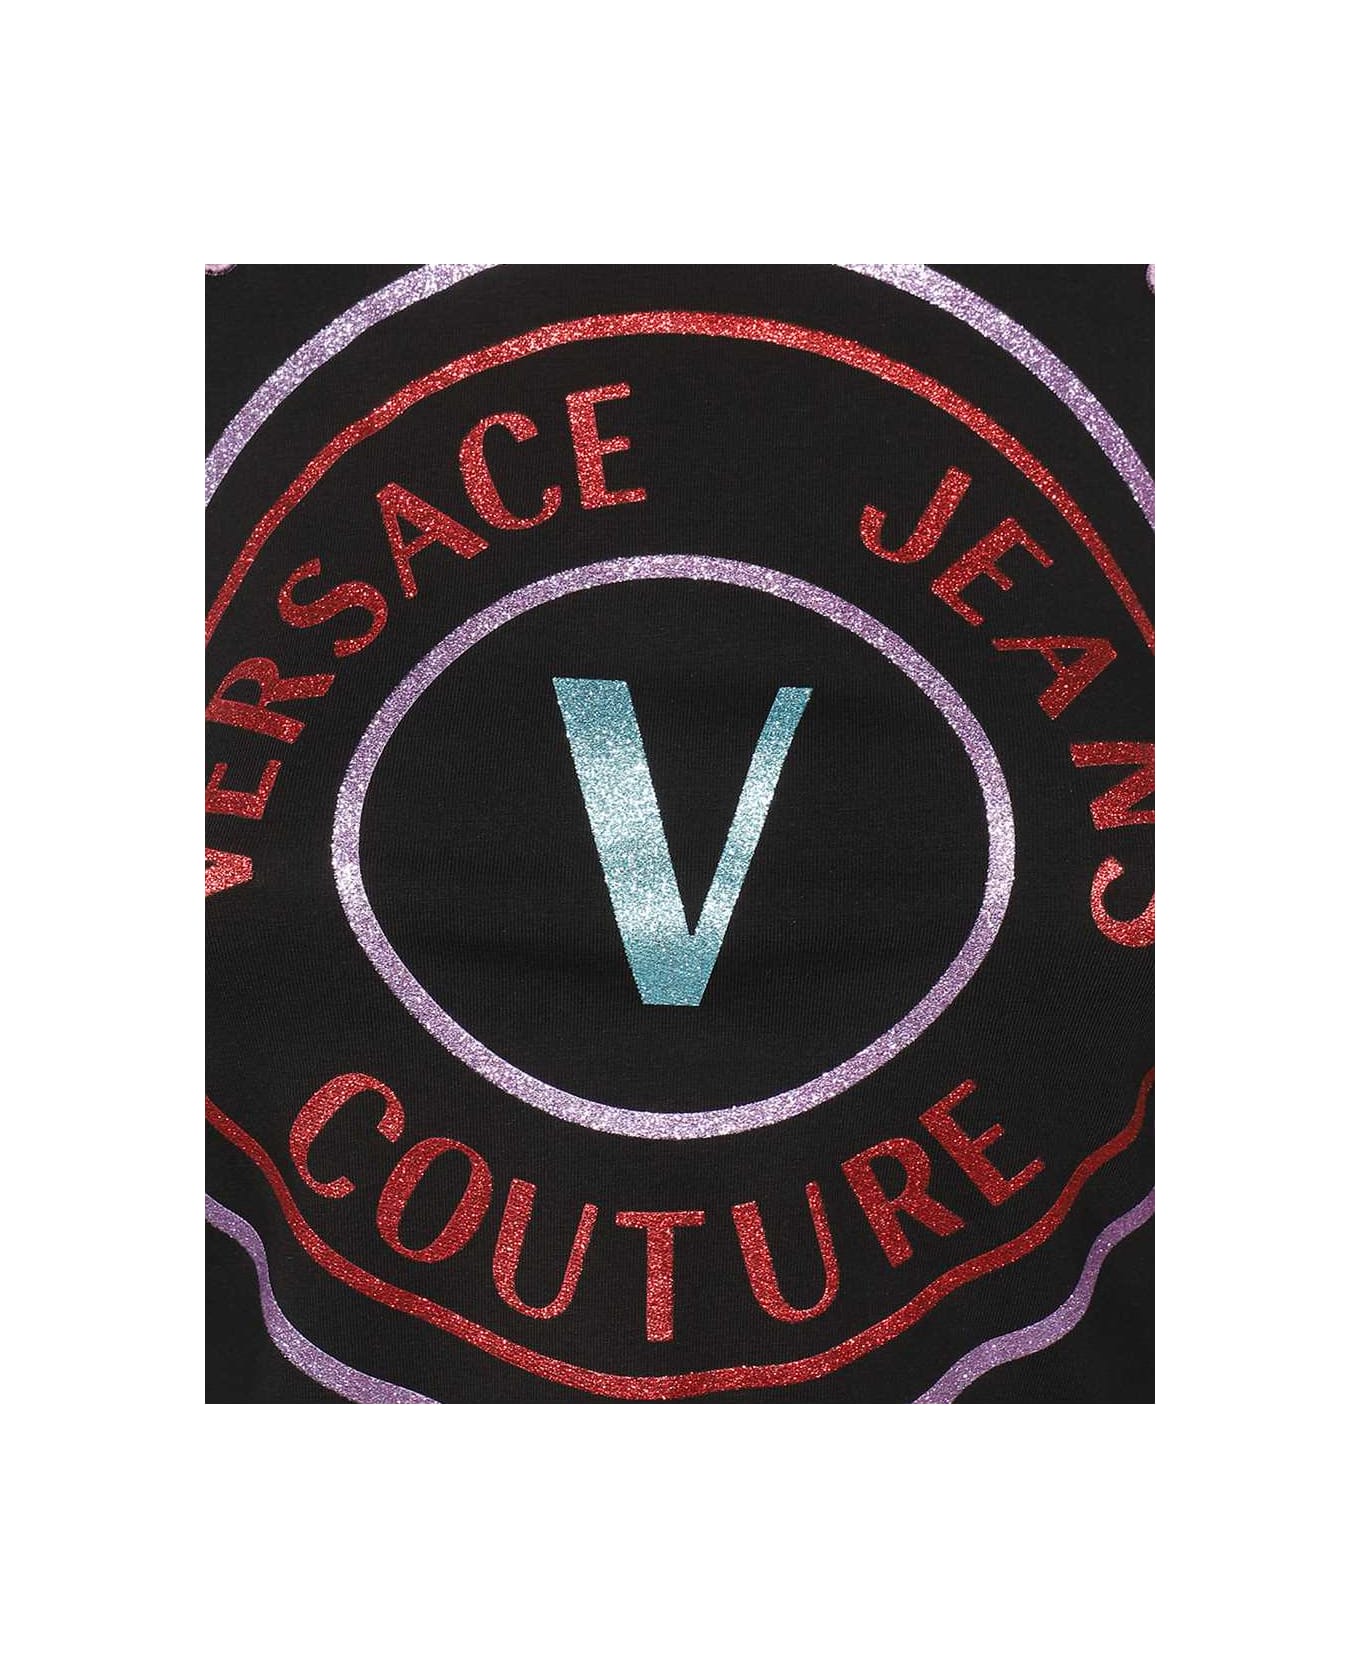 Versace Jeans Couture Long Sleeve Crop Top - black